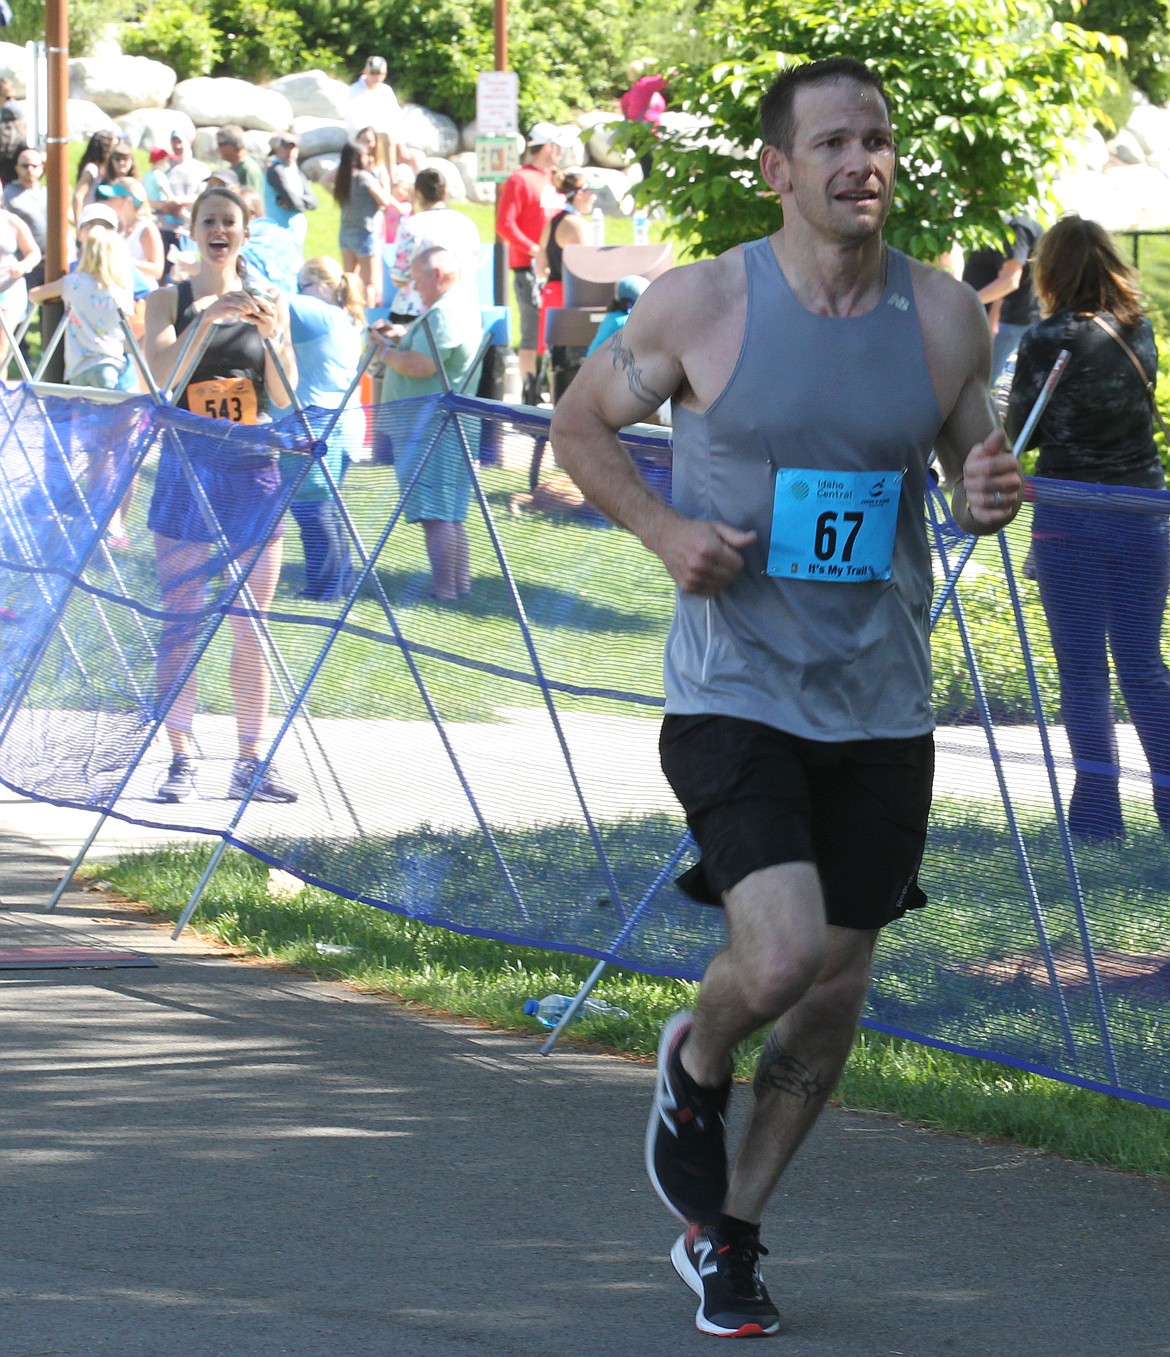 JASON ELLIOTT/Press
Joe Hewitt crosses the finish line to win Sunday&#146;s Coeur d&#146;Alene Marathon in 3 hours, 2 minutes and 7.8 seconds. Pictured in the back is Hewitt&#146;s wife, Chelsea, who competed in the half-marathon event on Sunday.